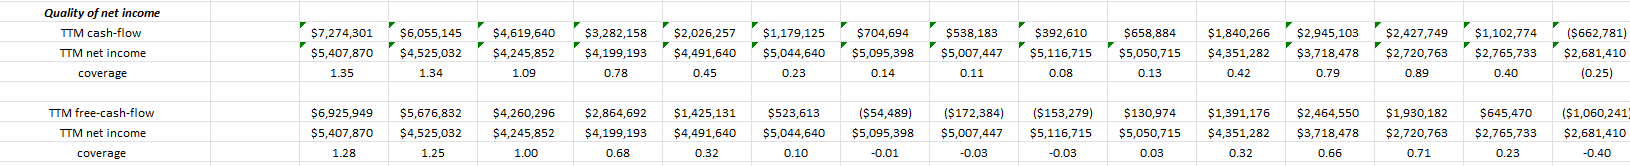 NFLX Quality of Income